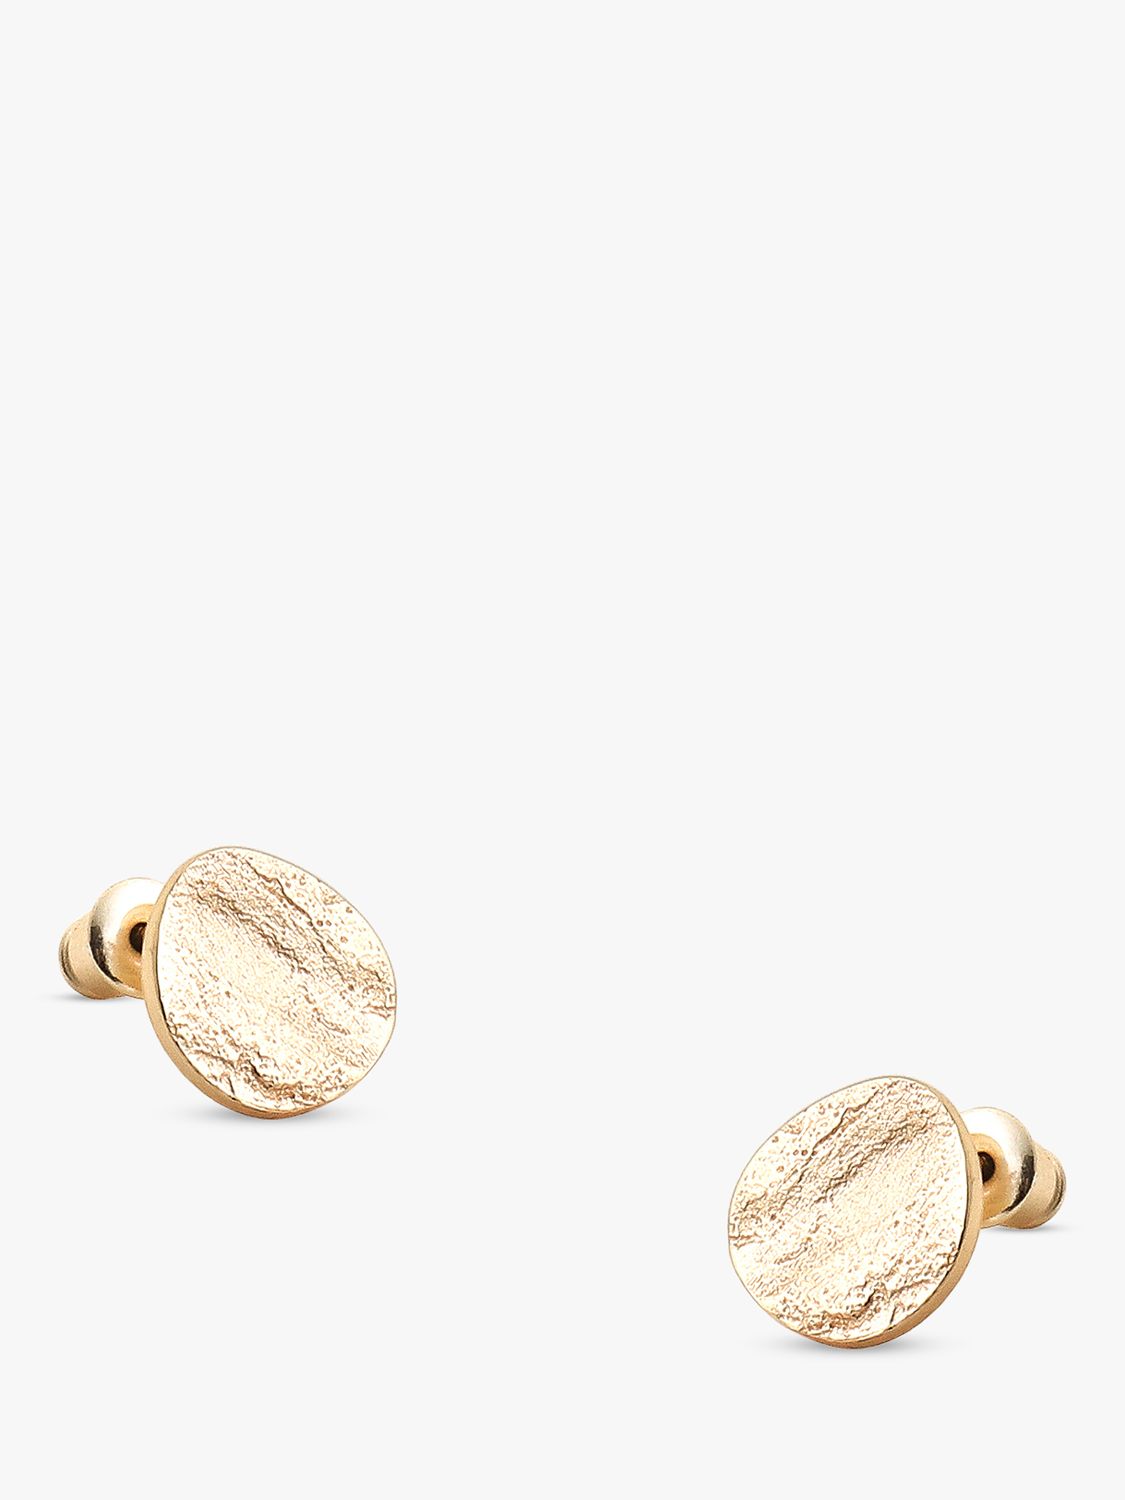 Tutti & Co Frost Textured Stud Earrings, Gold